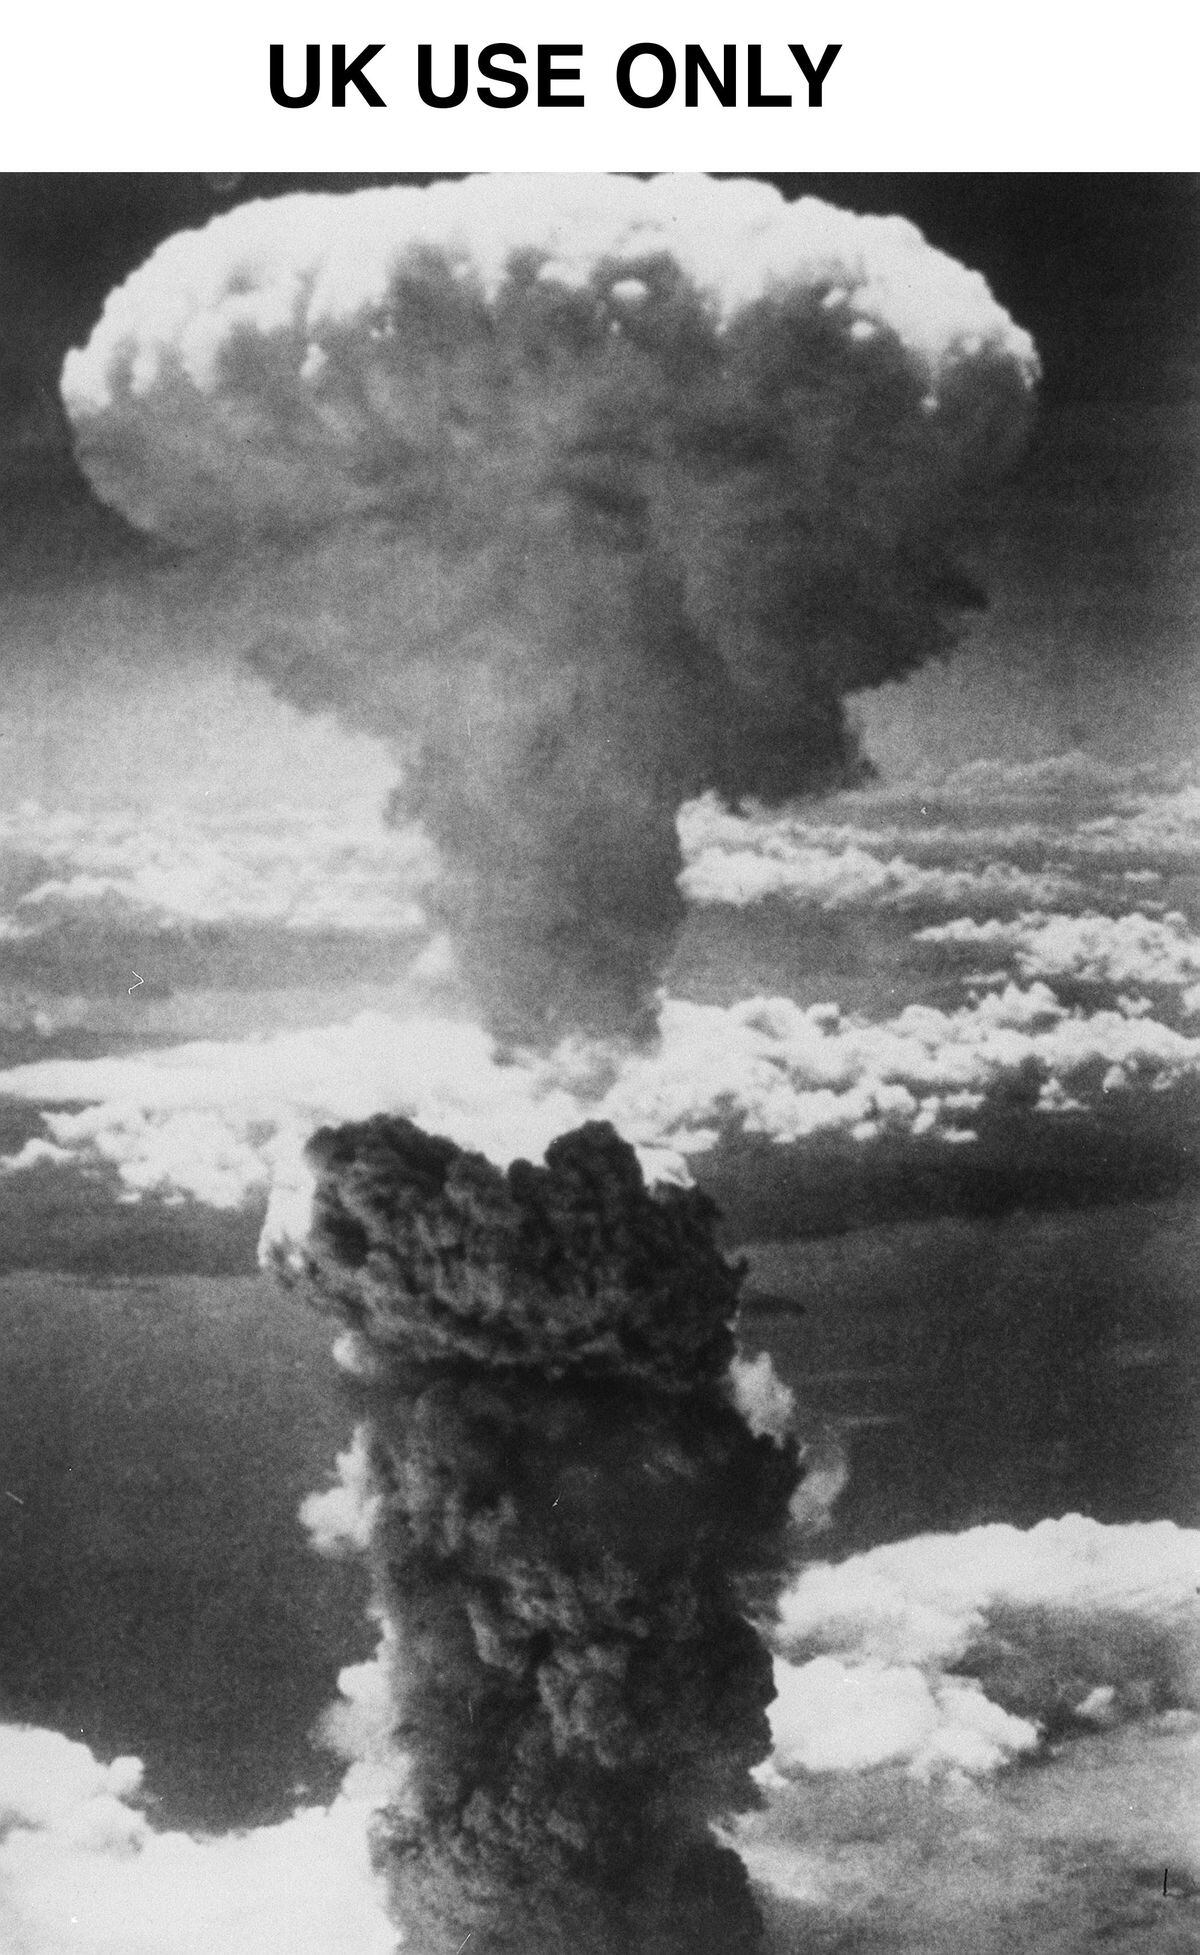 The atomic bomb dropped on the Japanese city of Hiroshima heralded the beginning of the nuclear age. 